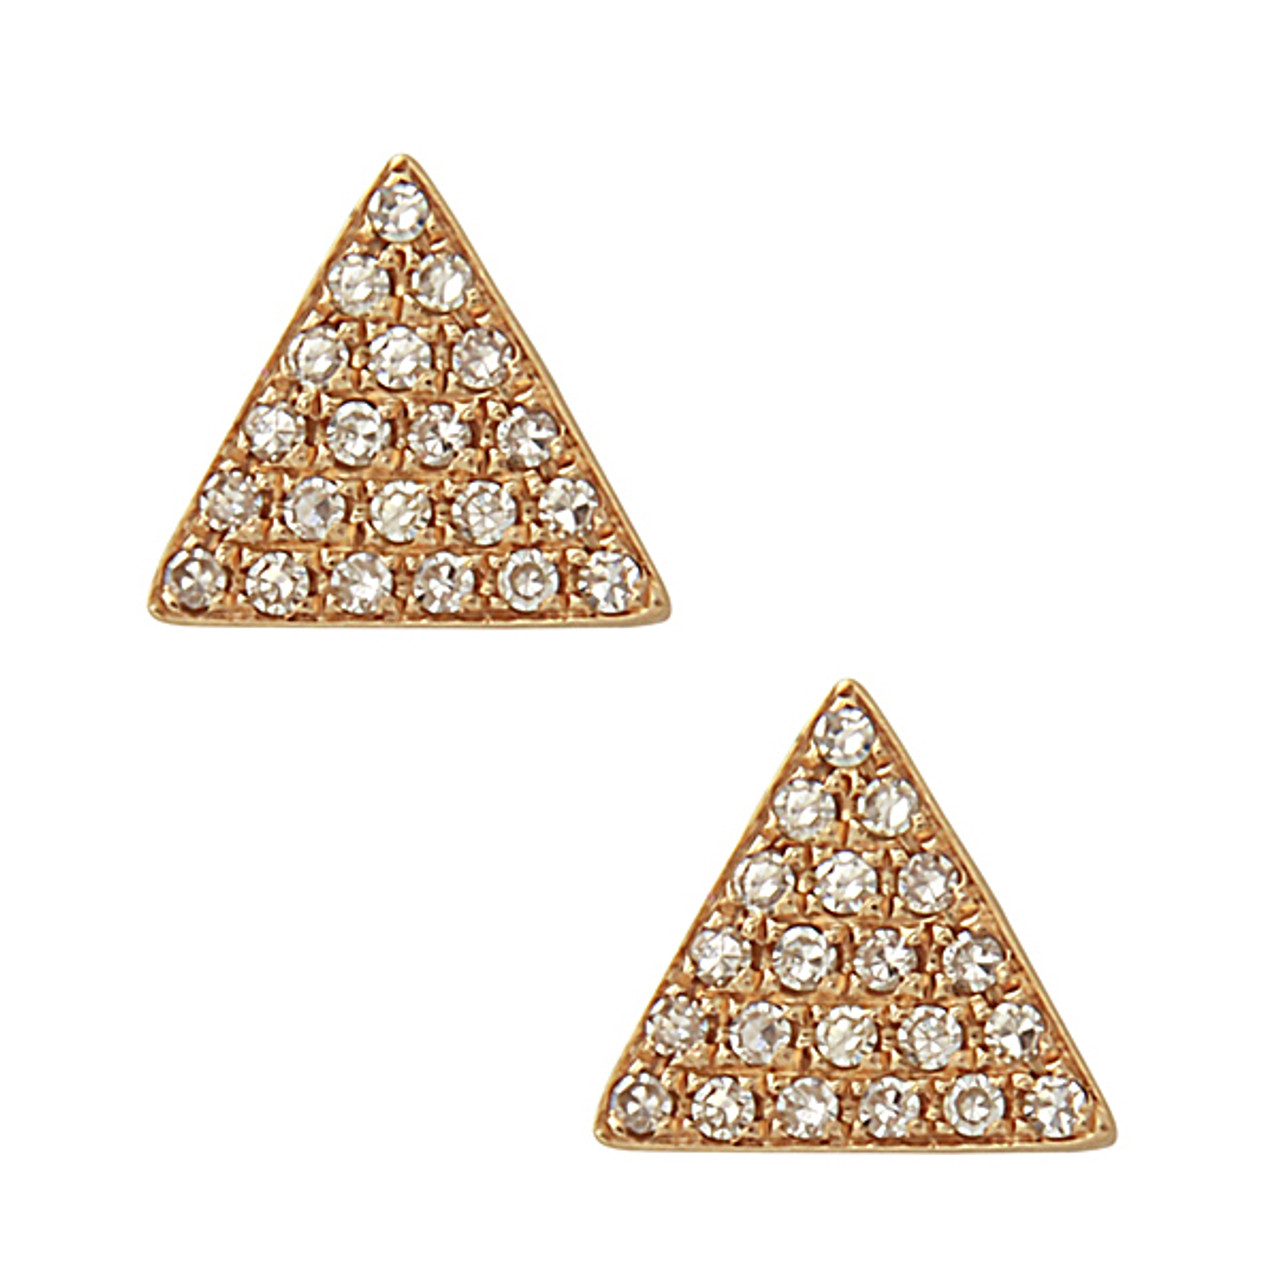 14K Gold and Diamond Triangle Earrings by Bassali